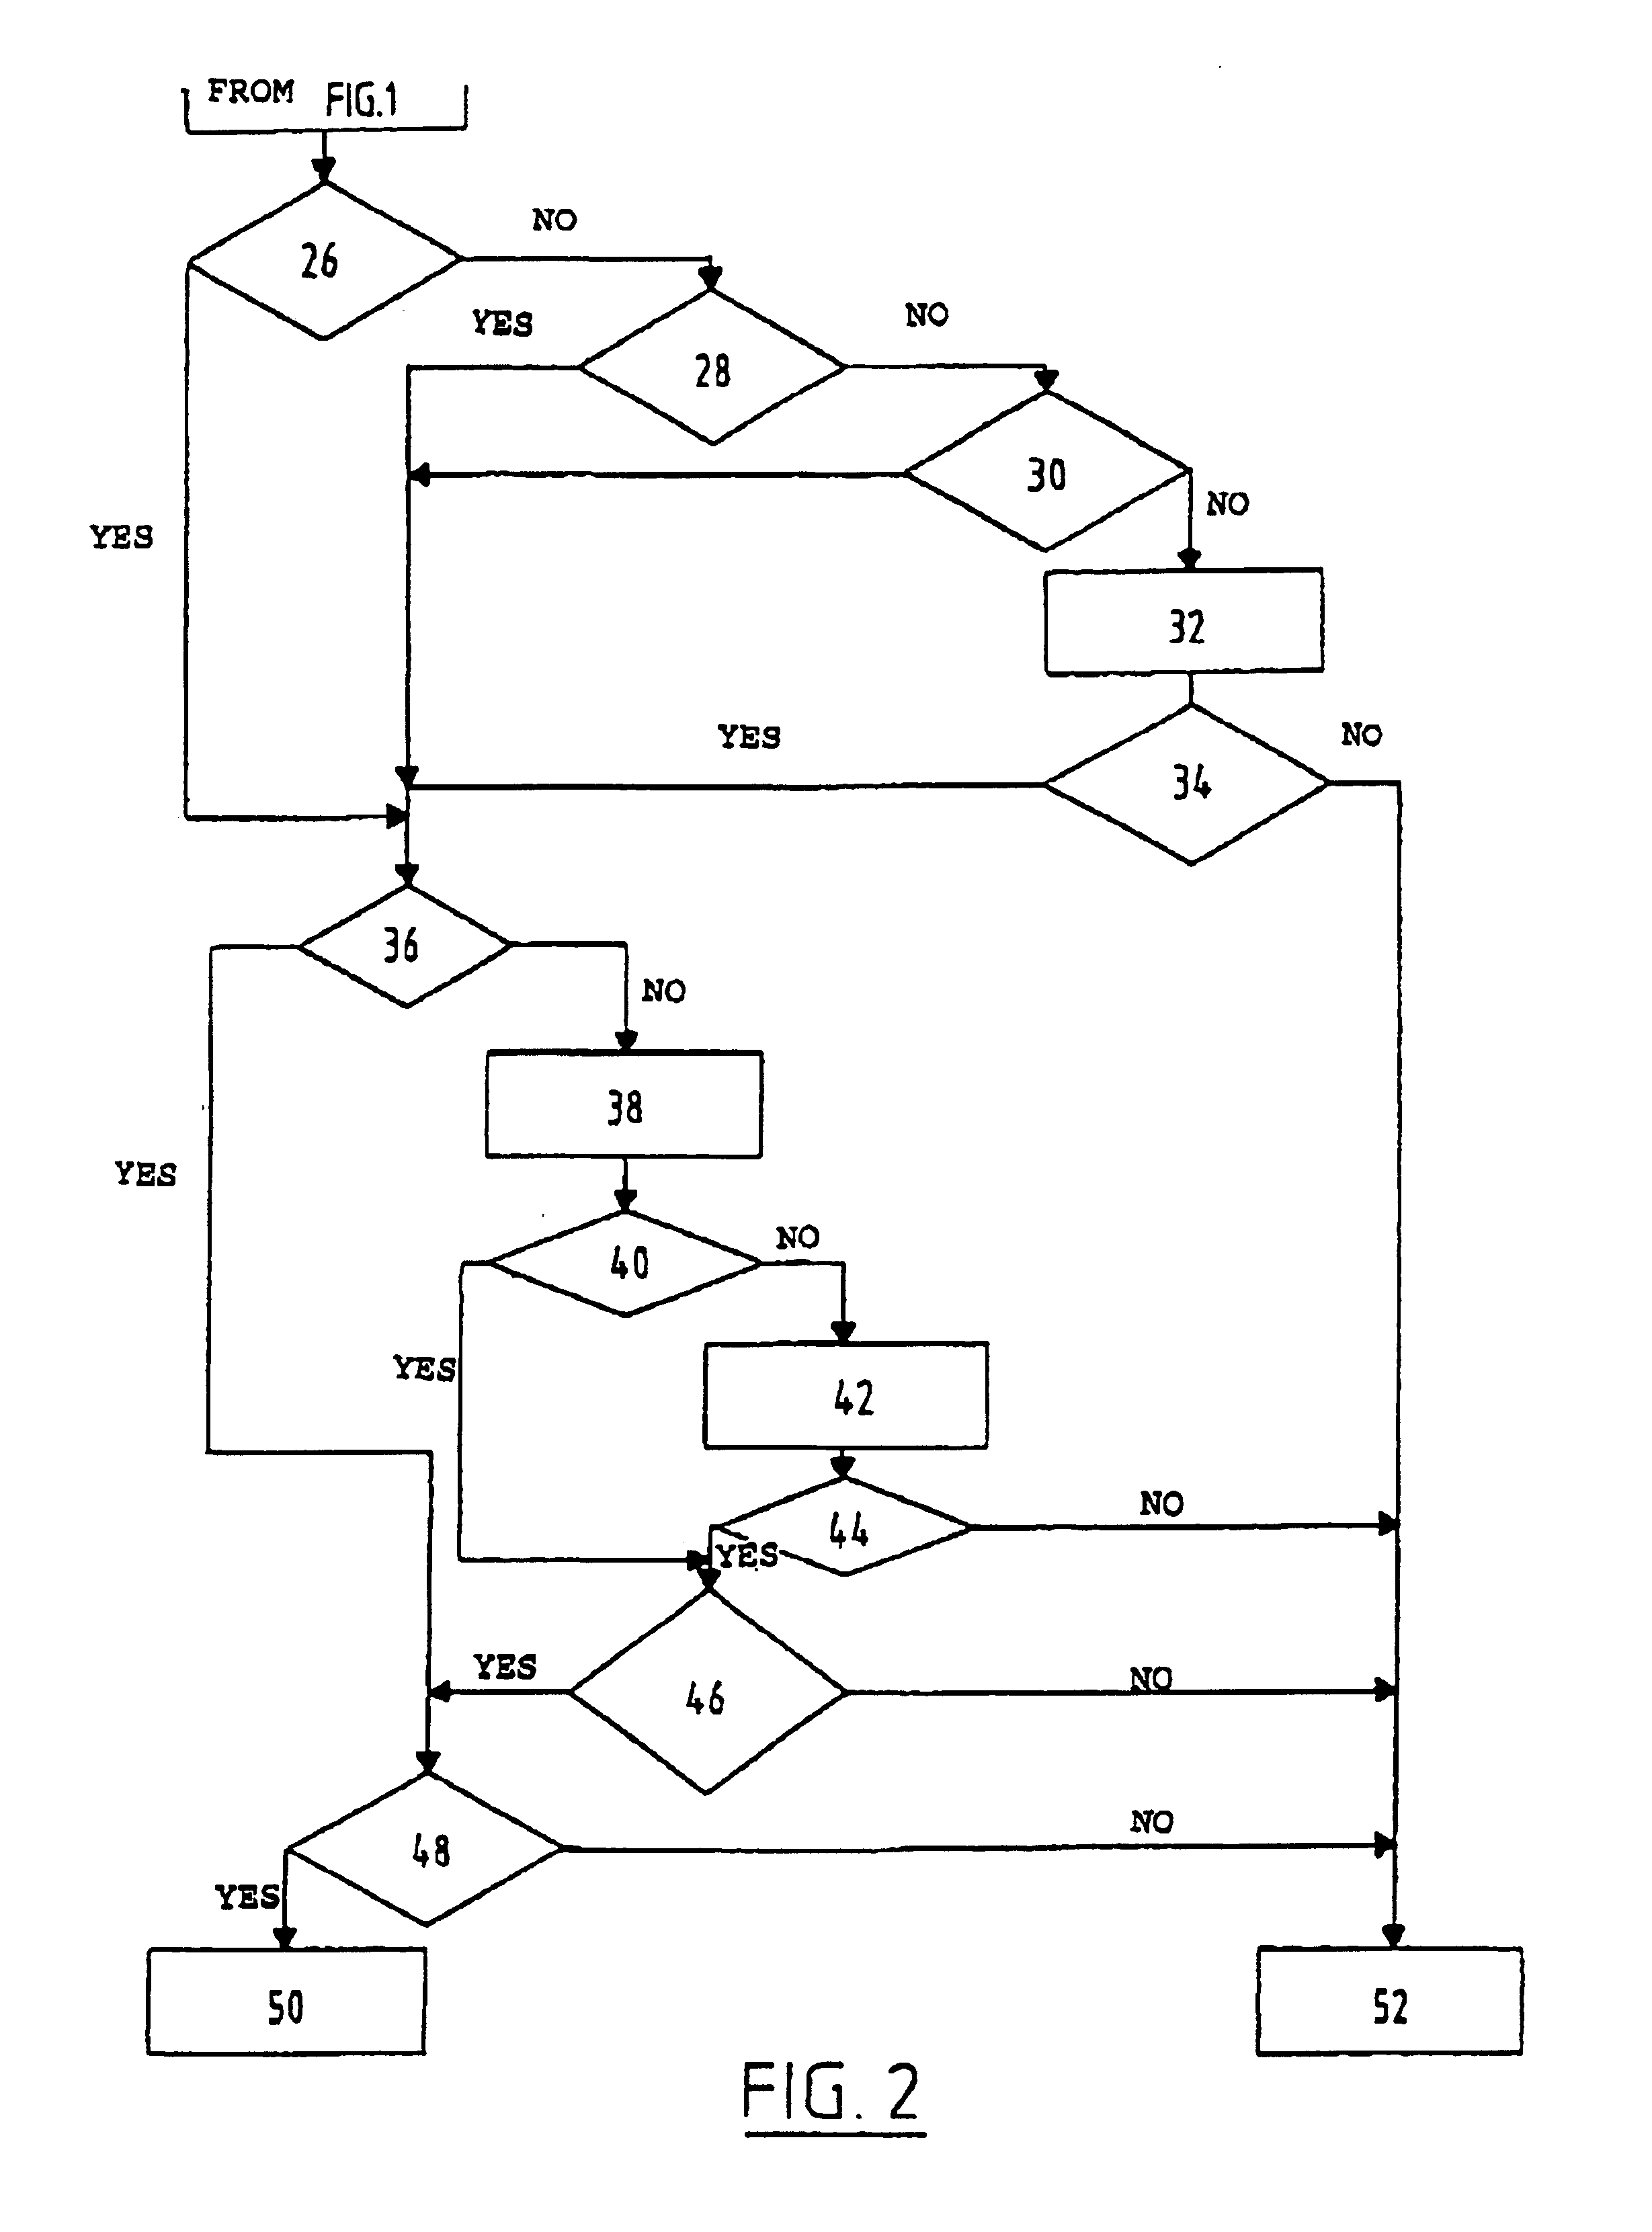 Method for electronically addressing of a person or organization